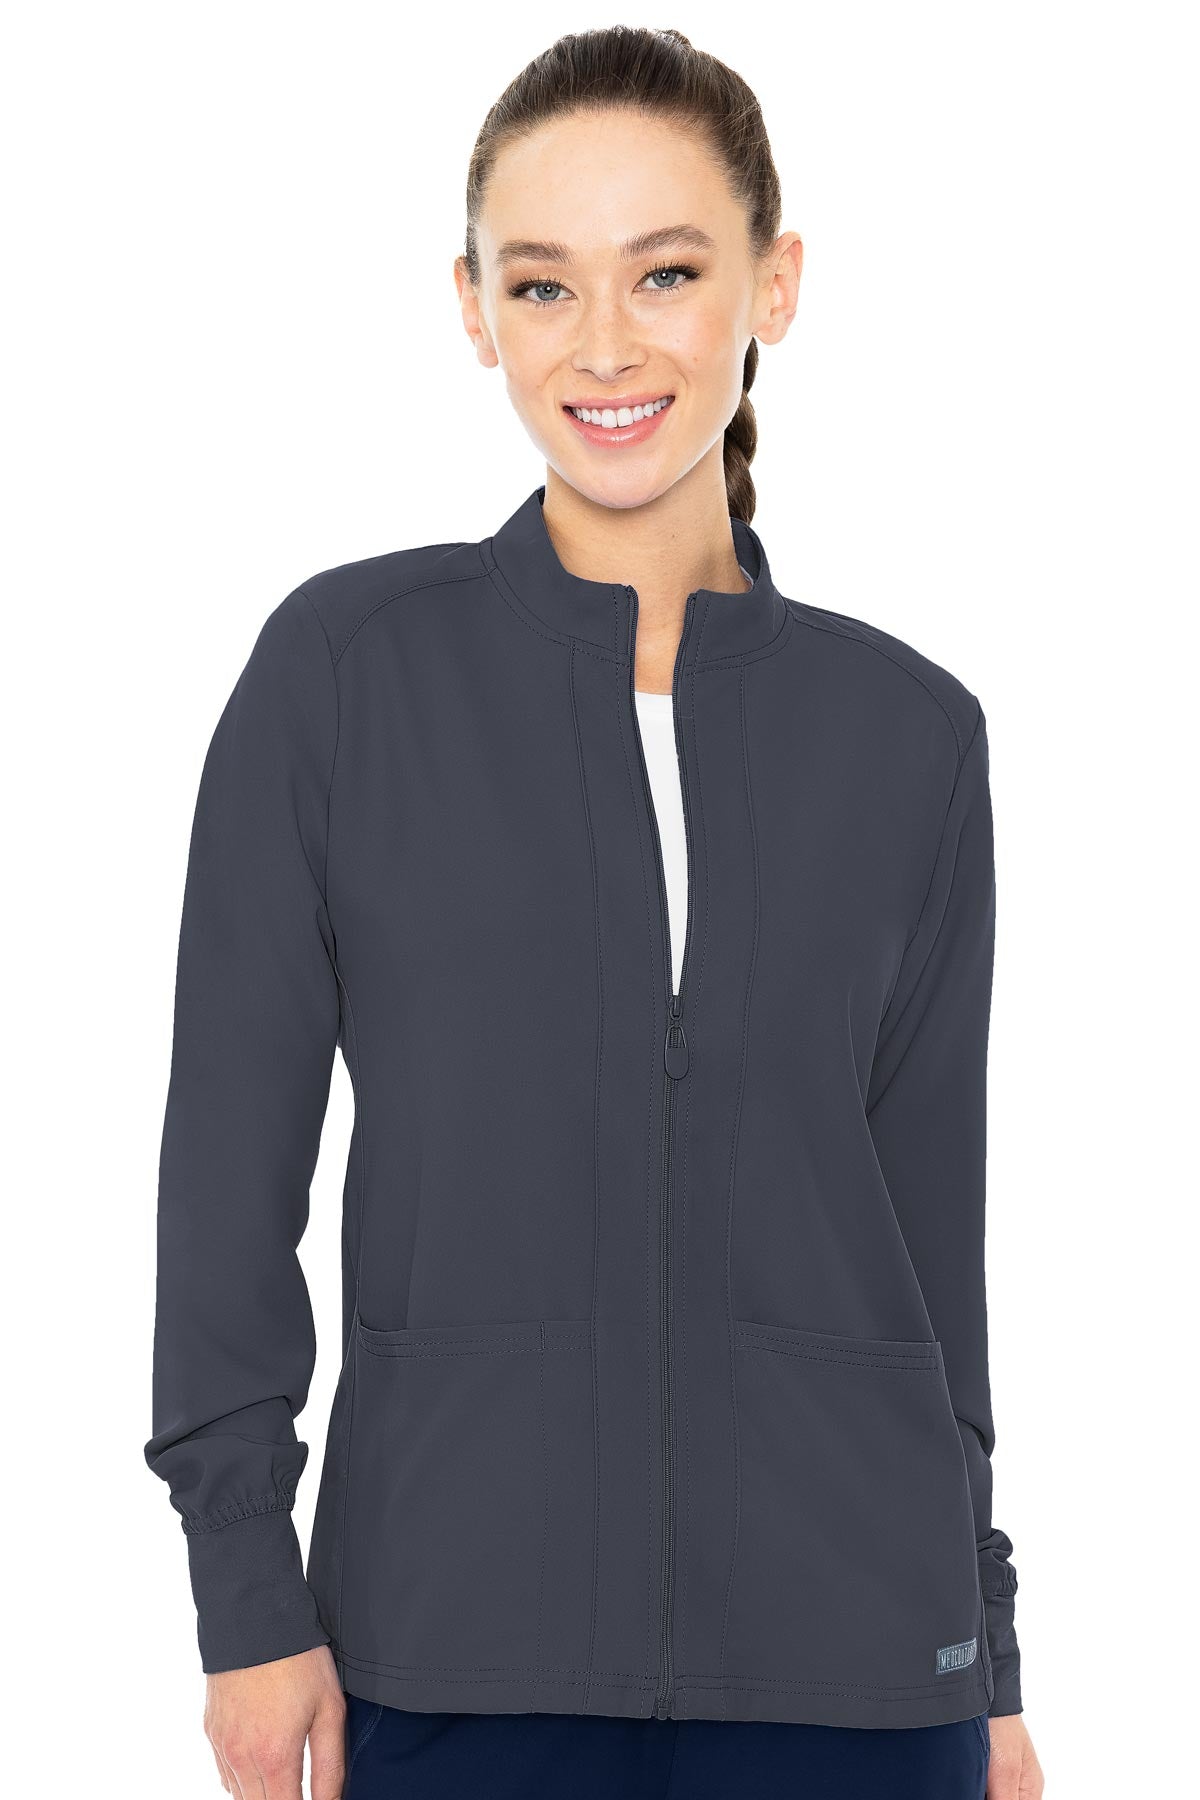 Med Couture Front Pocket Warm Up Plus